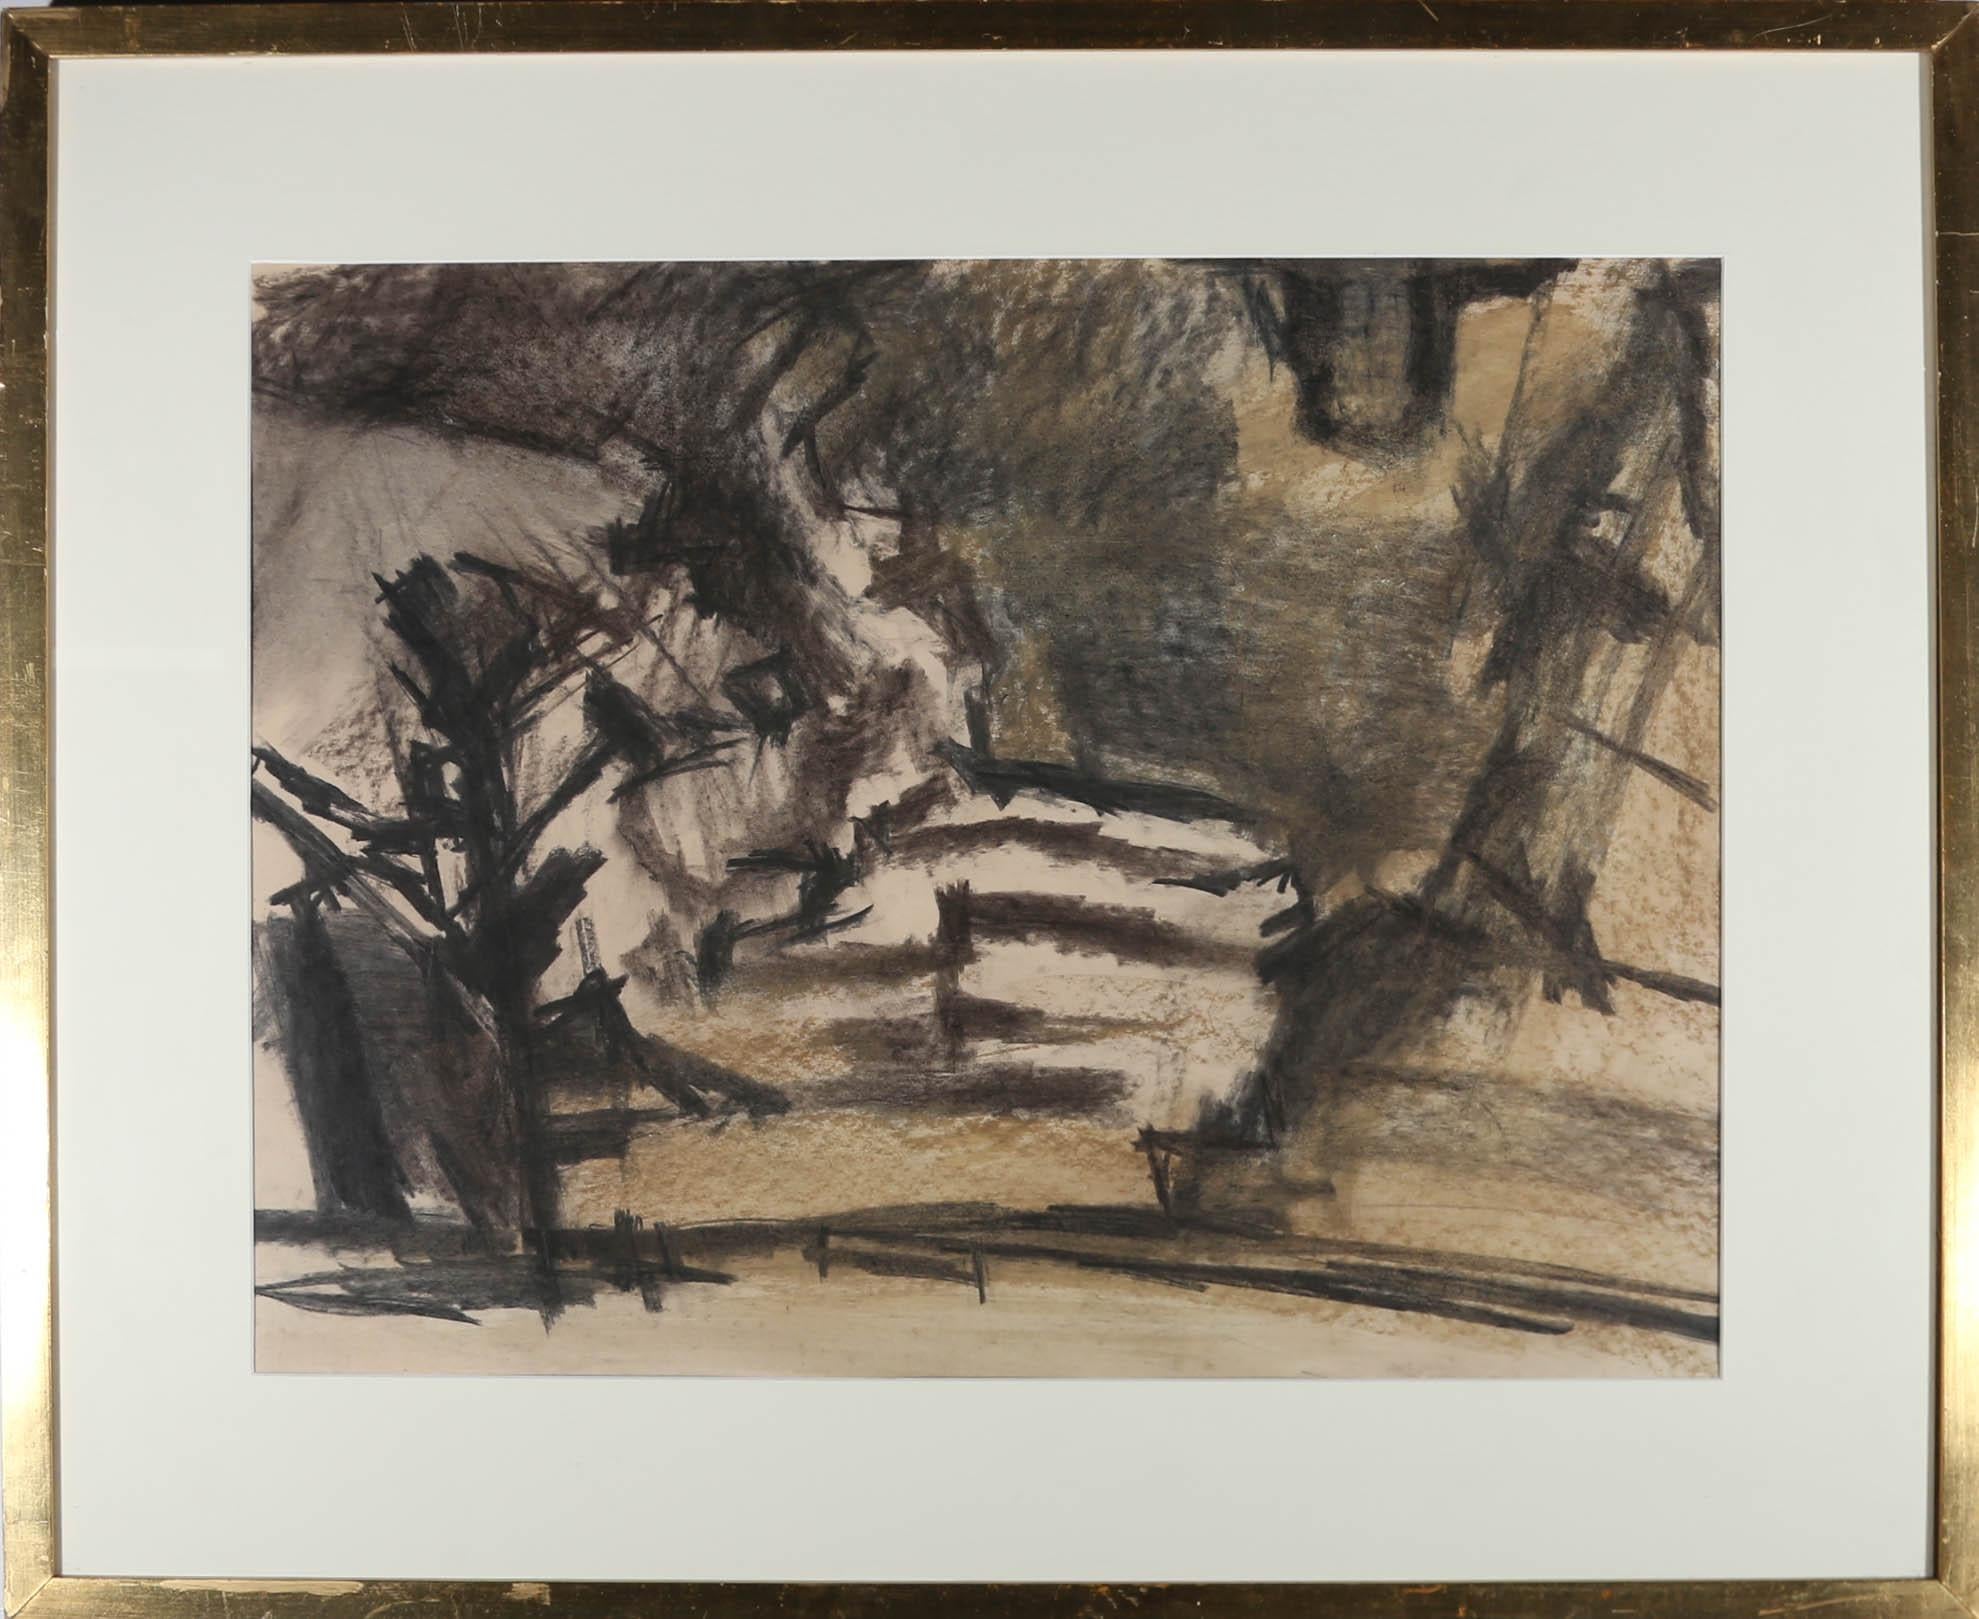 Unknown Landscape Art - 20th Century Charcoal Drawing - Abstracted Landscape